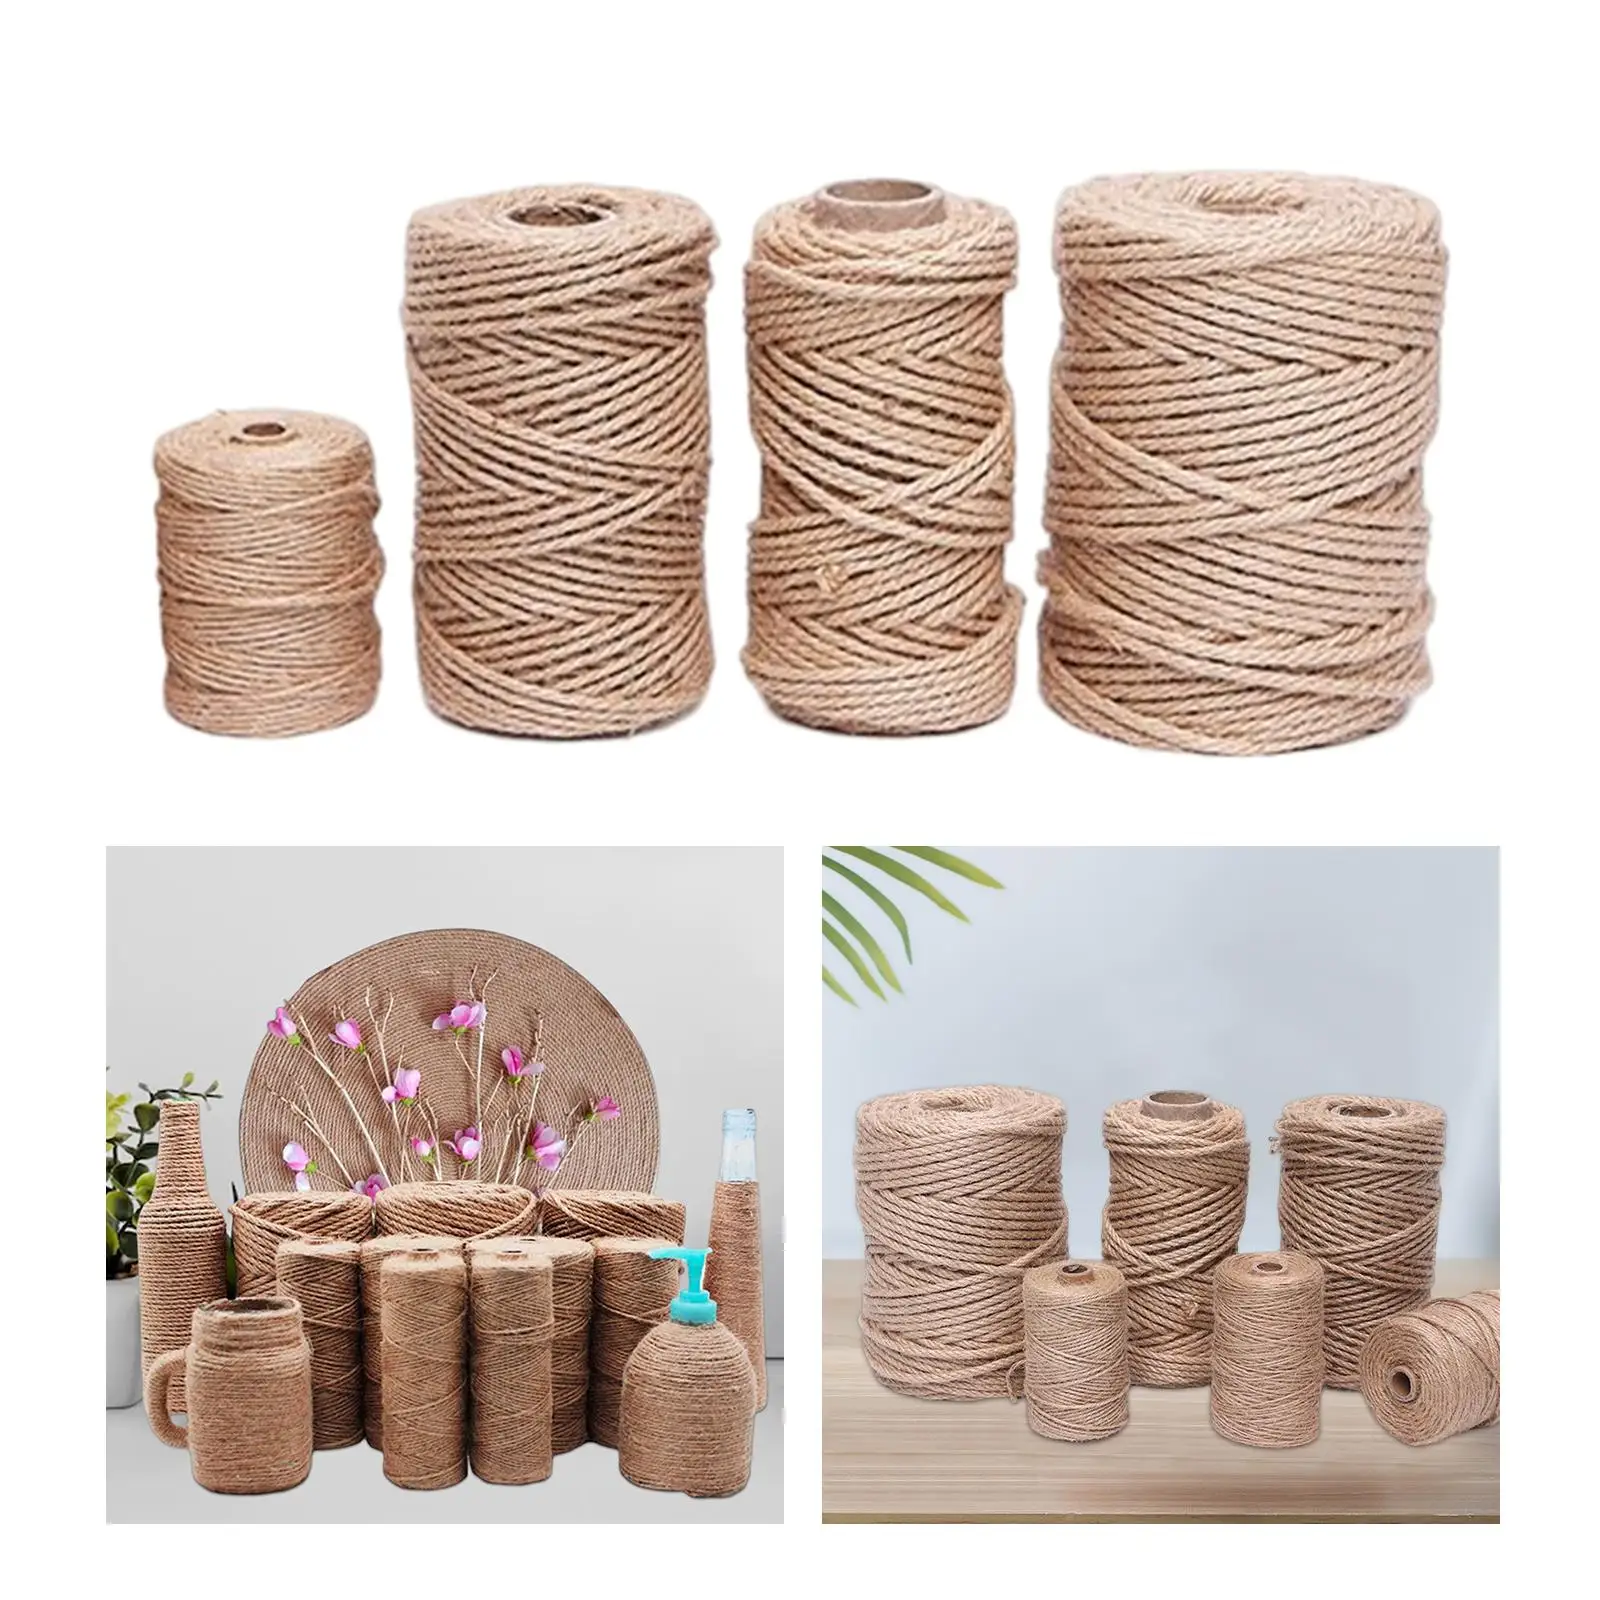 Jute Twine Artwork Durable Handcraft Hemp Rope Twisted Sisal Rope for Cats Scratching Post Toys Decor Cat Scratcher Wedding